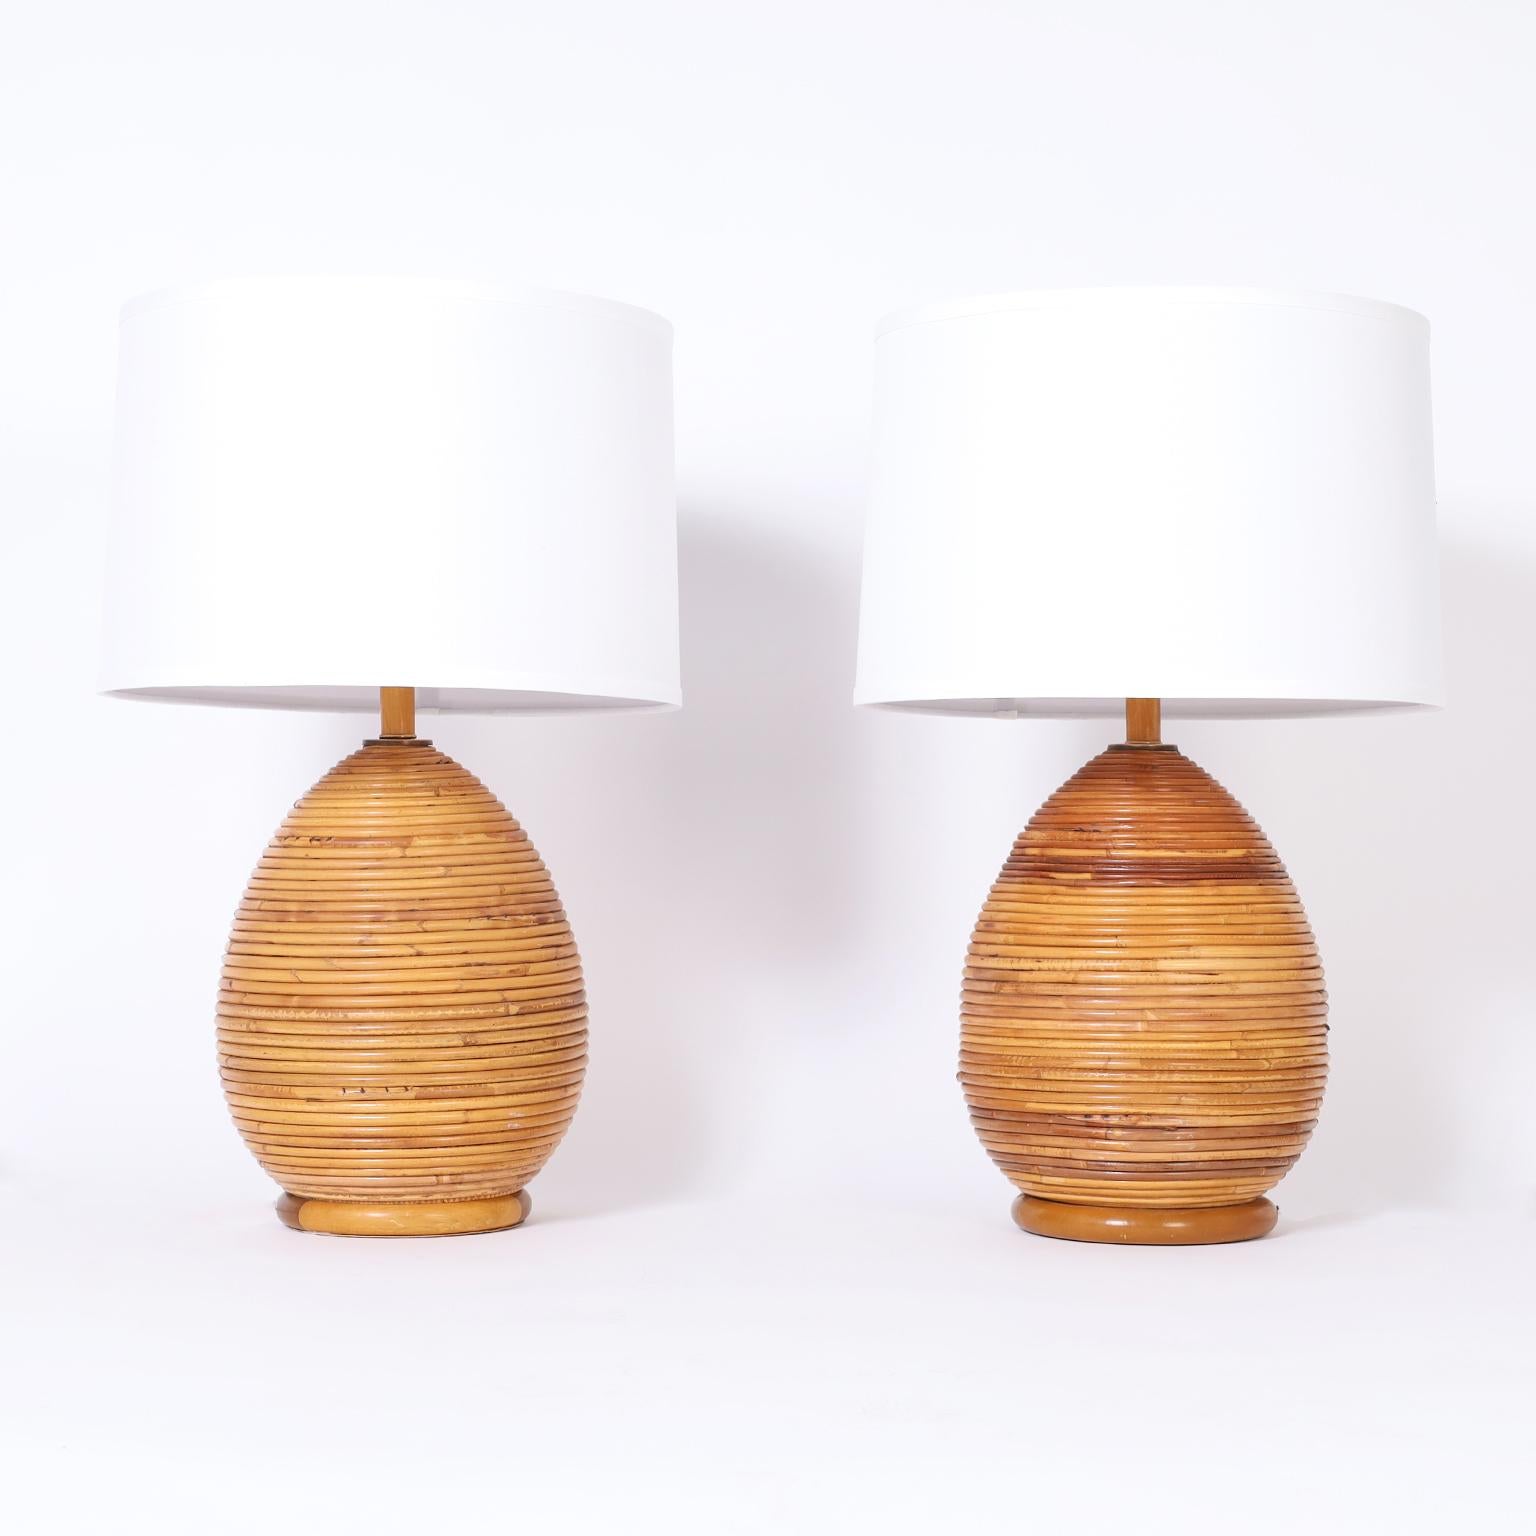 Italian mid-century table lamps crafted with pencil reed or rattan wrapped around classic modern form on round wood bases.